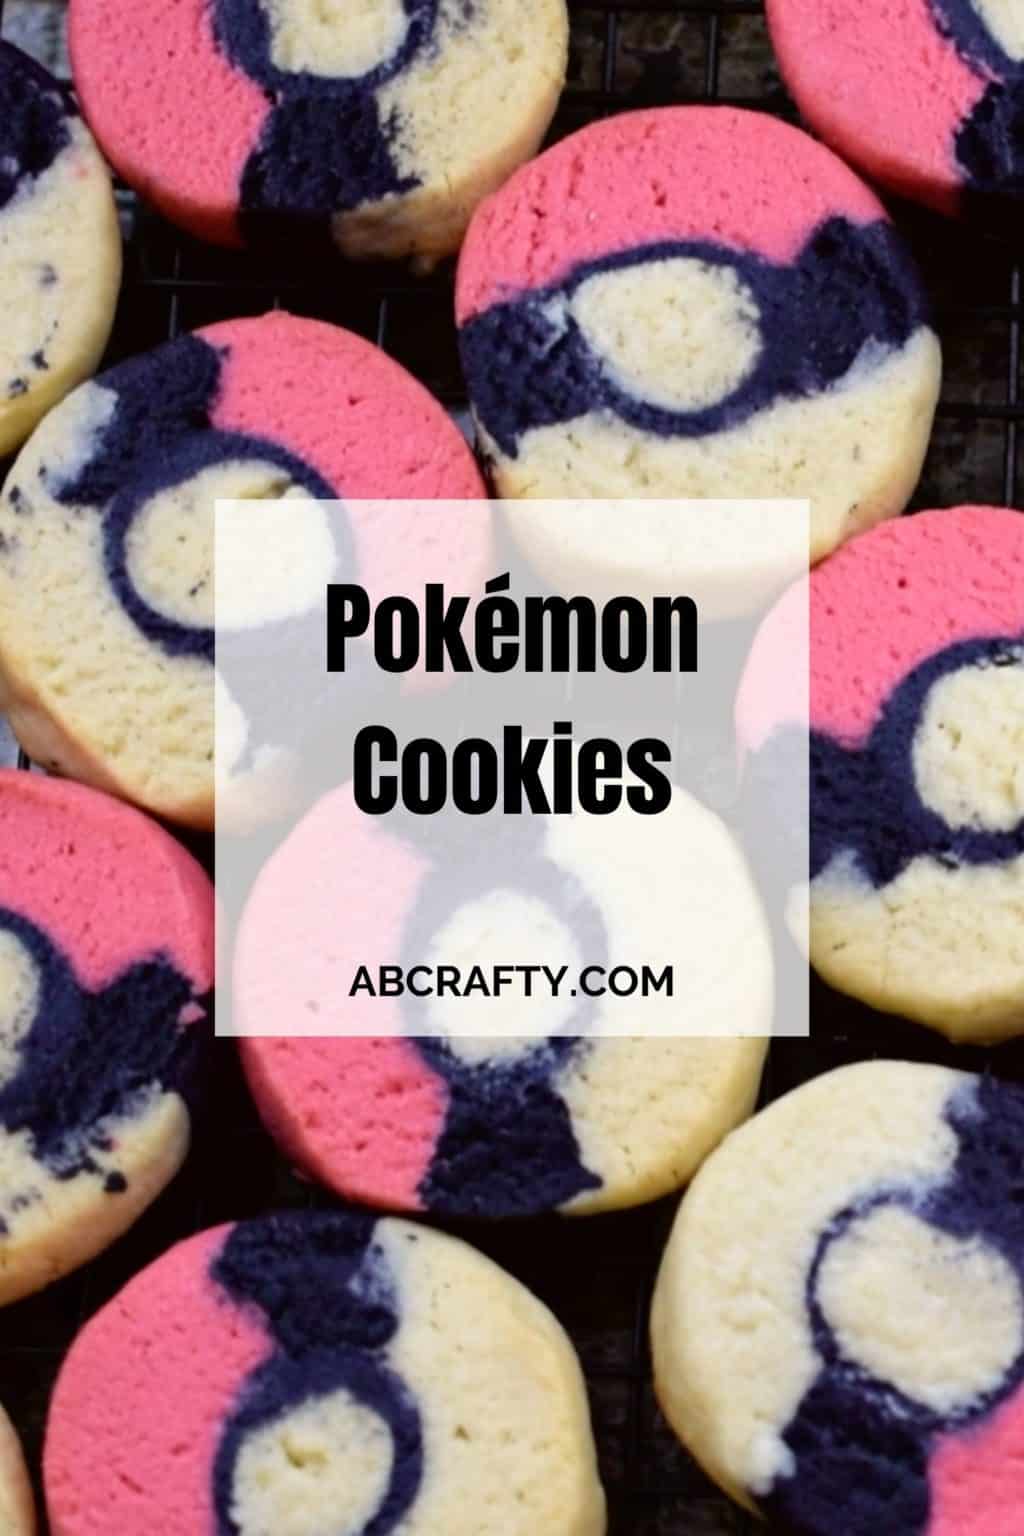 pokemon sugar cookies in the shape of a pokeball with the titel "pokemon cookies"